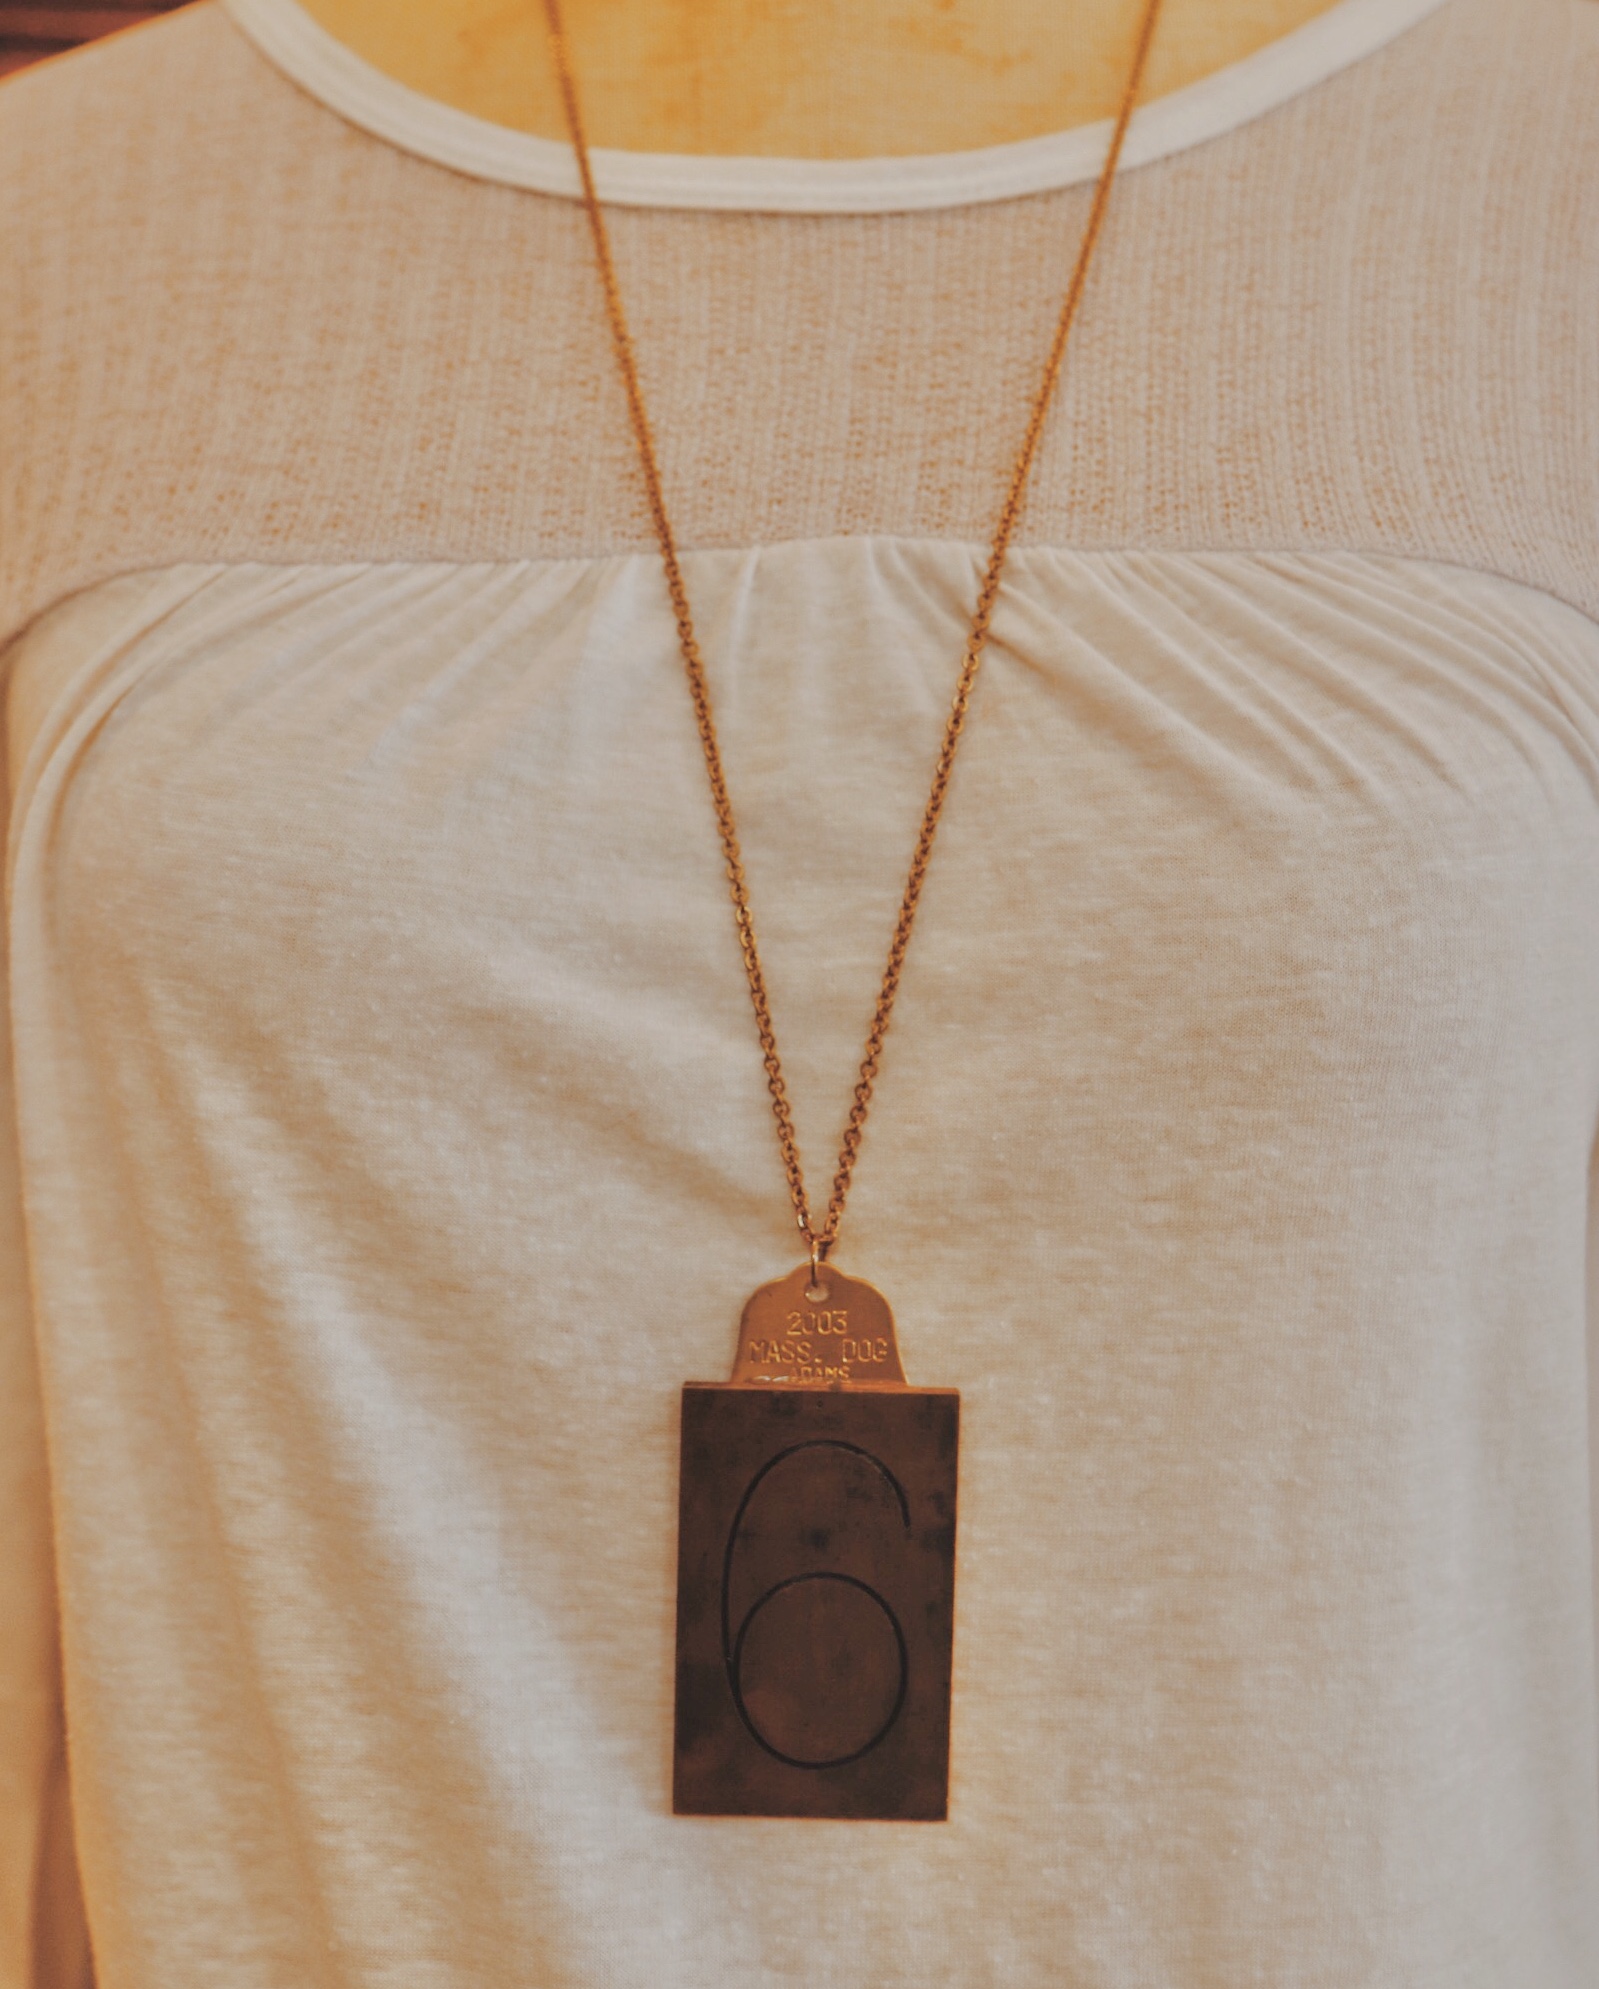 This handmade necklace has a 6 engraved brass plate and hangs on a 32 inch chain!